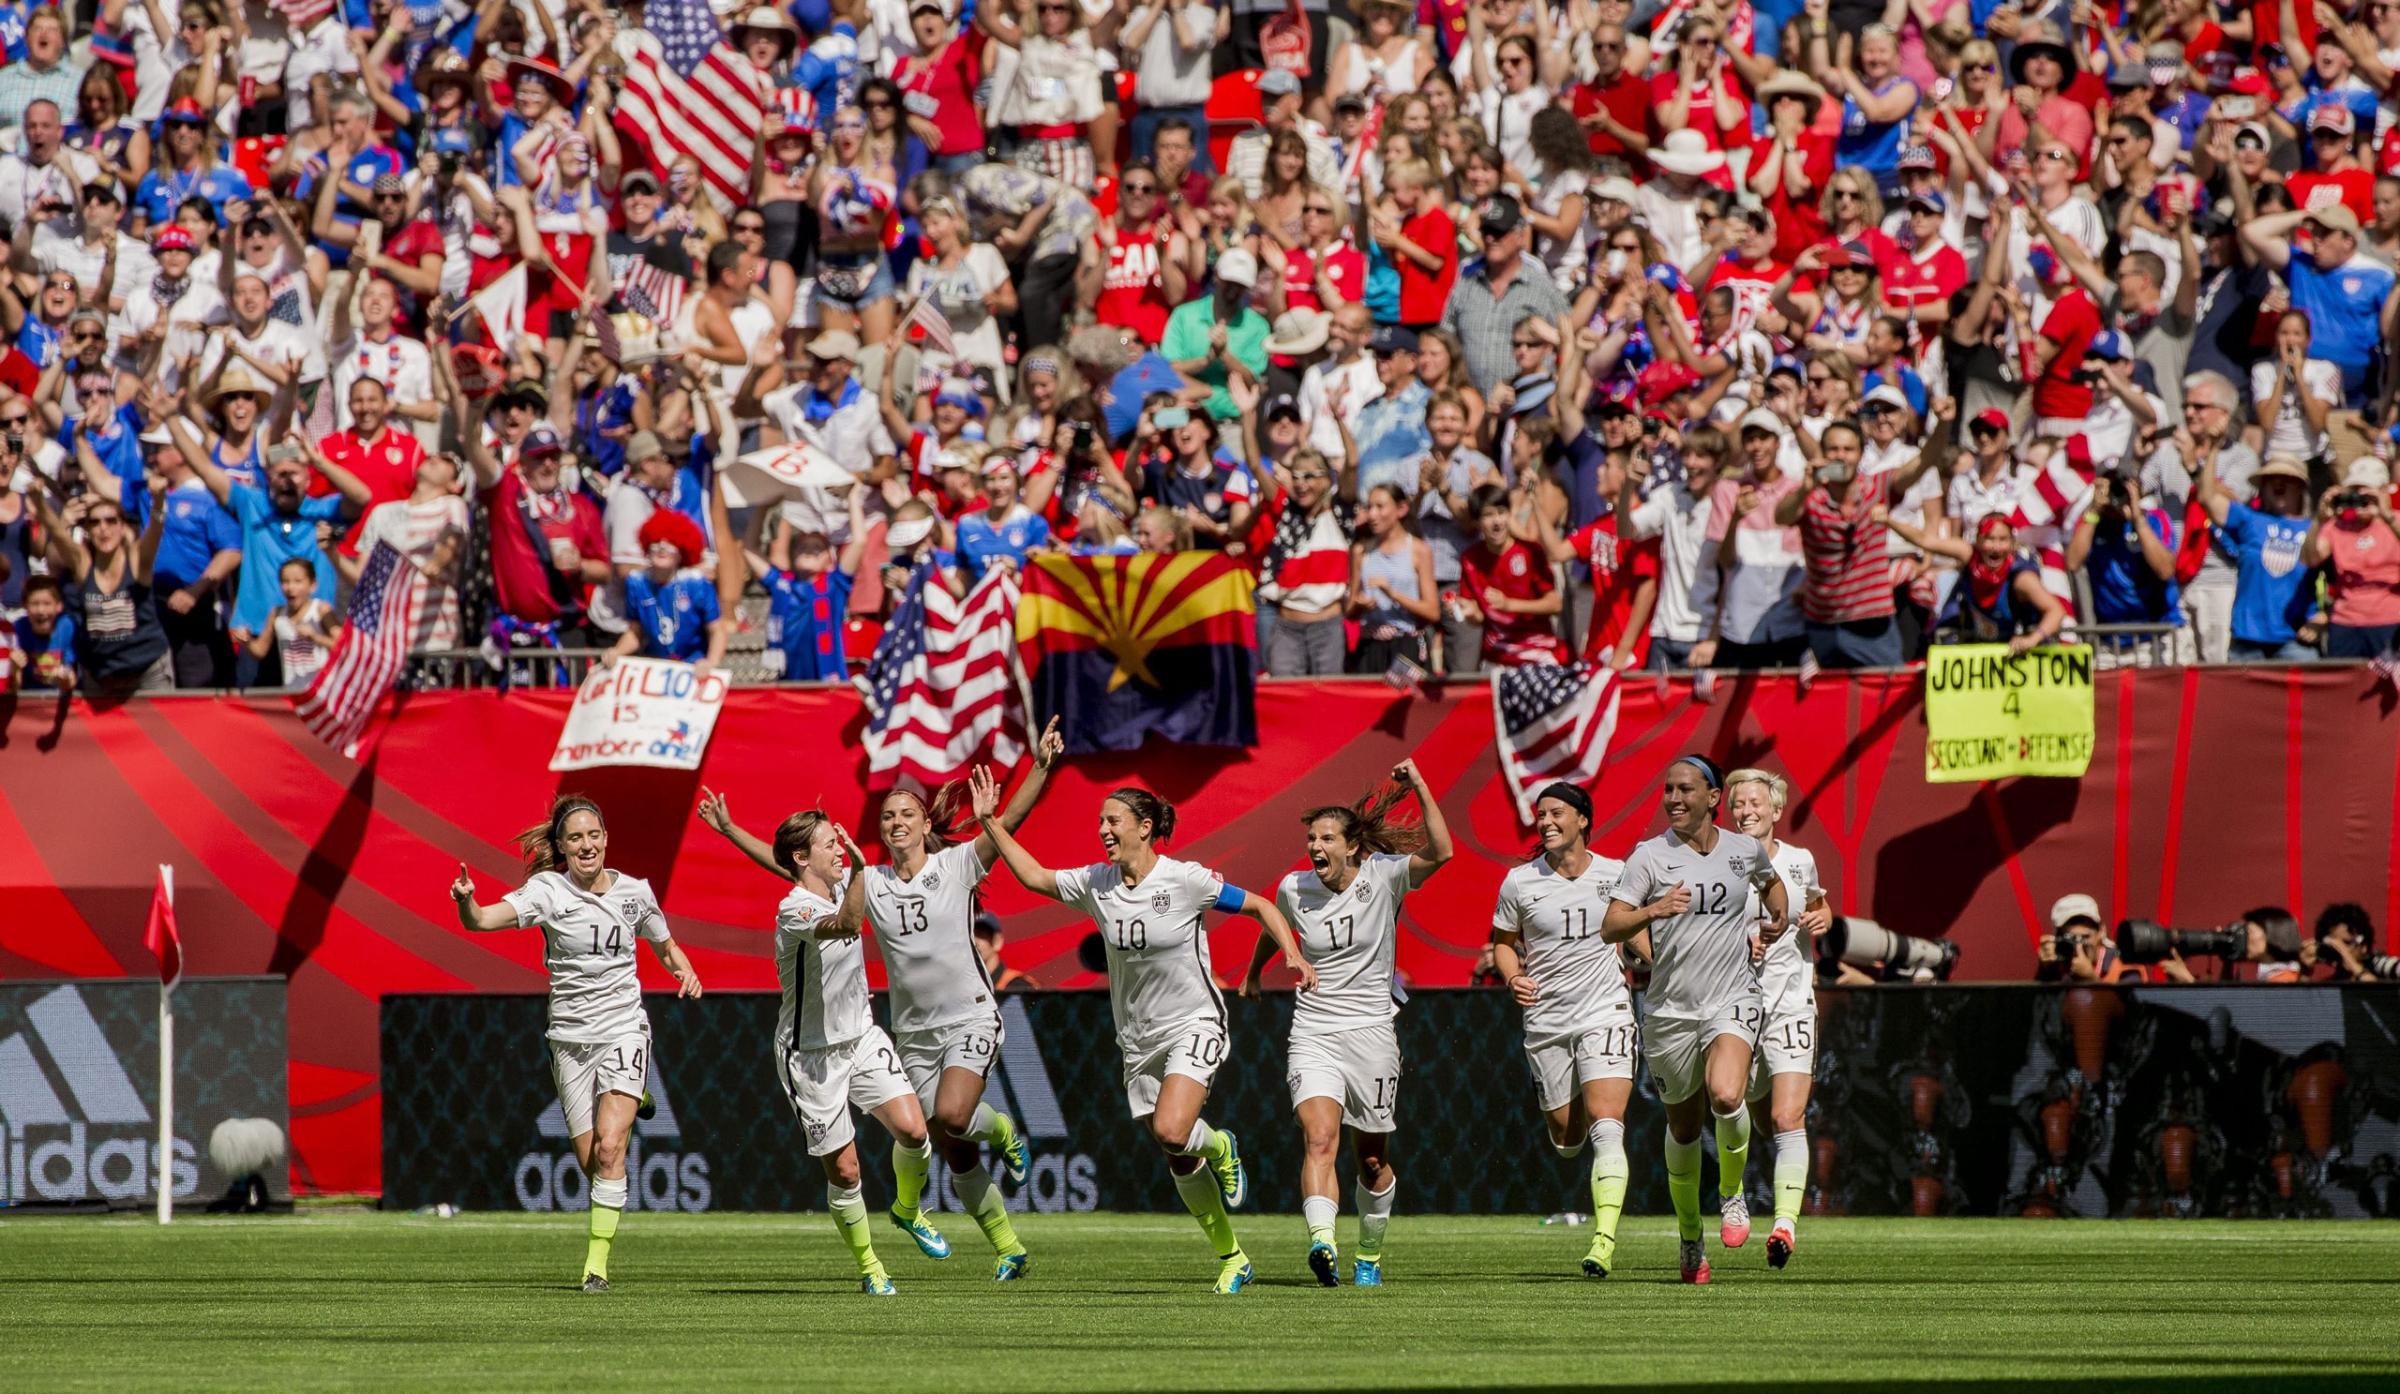 Carli Lloyd of the United States celebrates her second goal of the first half with teammates during the FIFA Women's World Cup 2015 Final match between USA and Japan in Vancouver, on 05 July 2015.